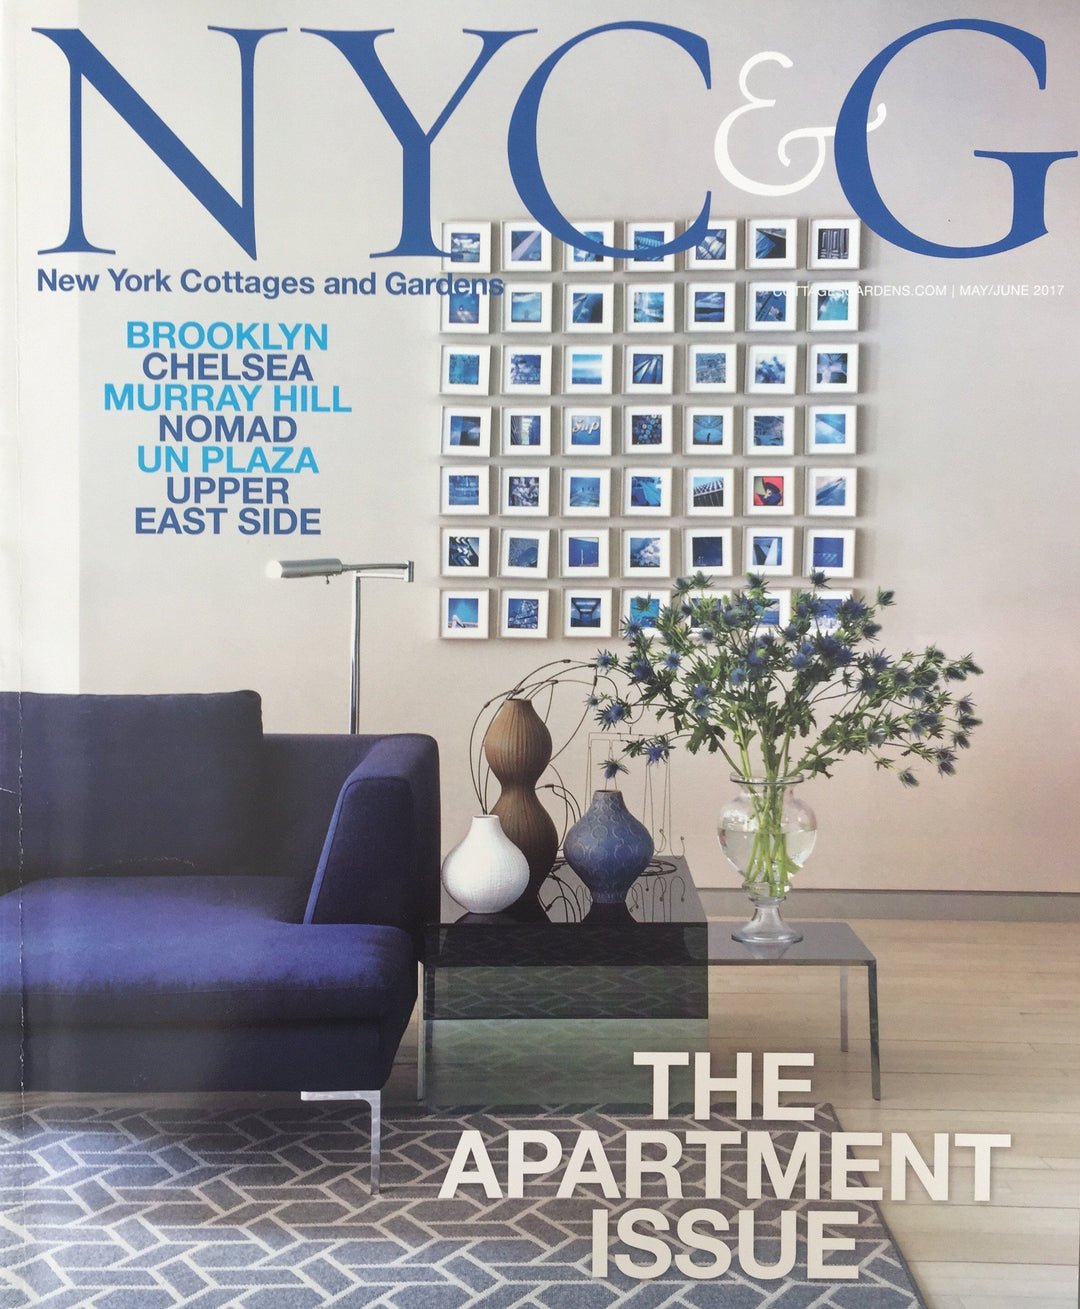 NYC&G May 2017 Issue